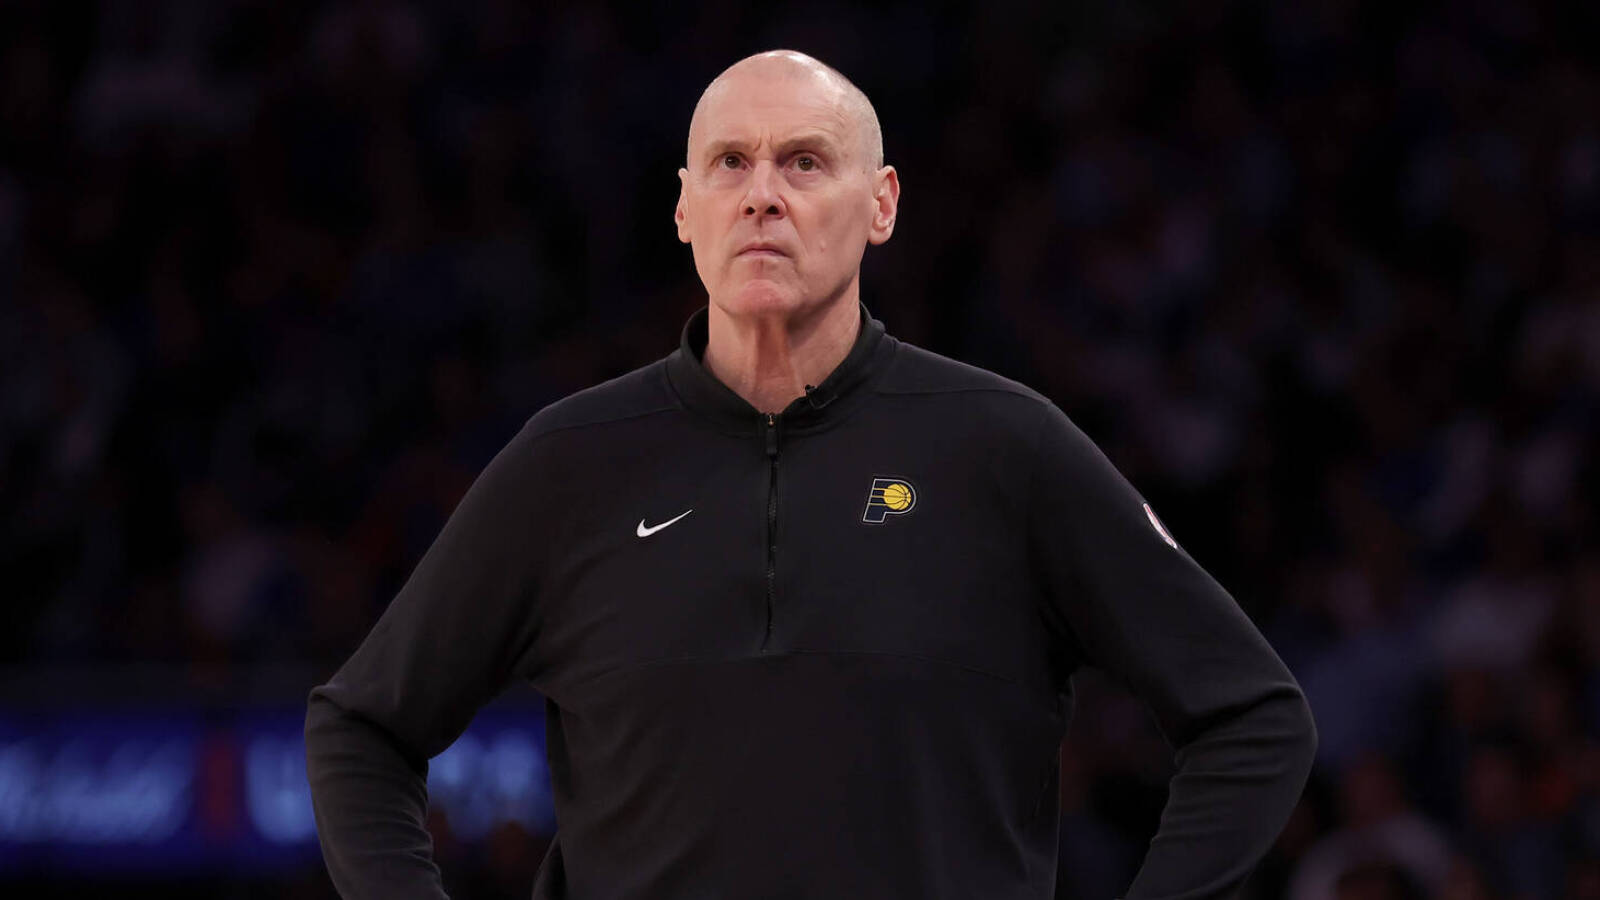 Watch: Bizarre non-call gets Pacers coach ejected